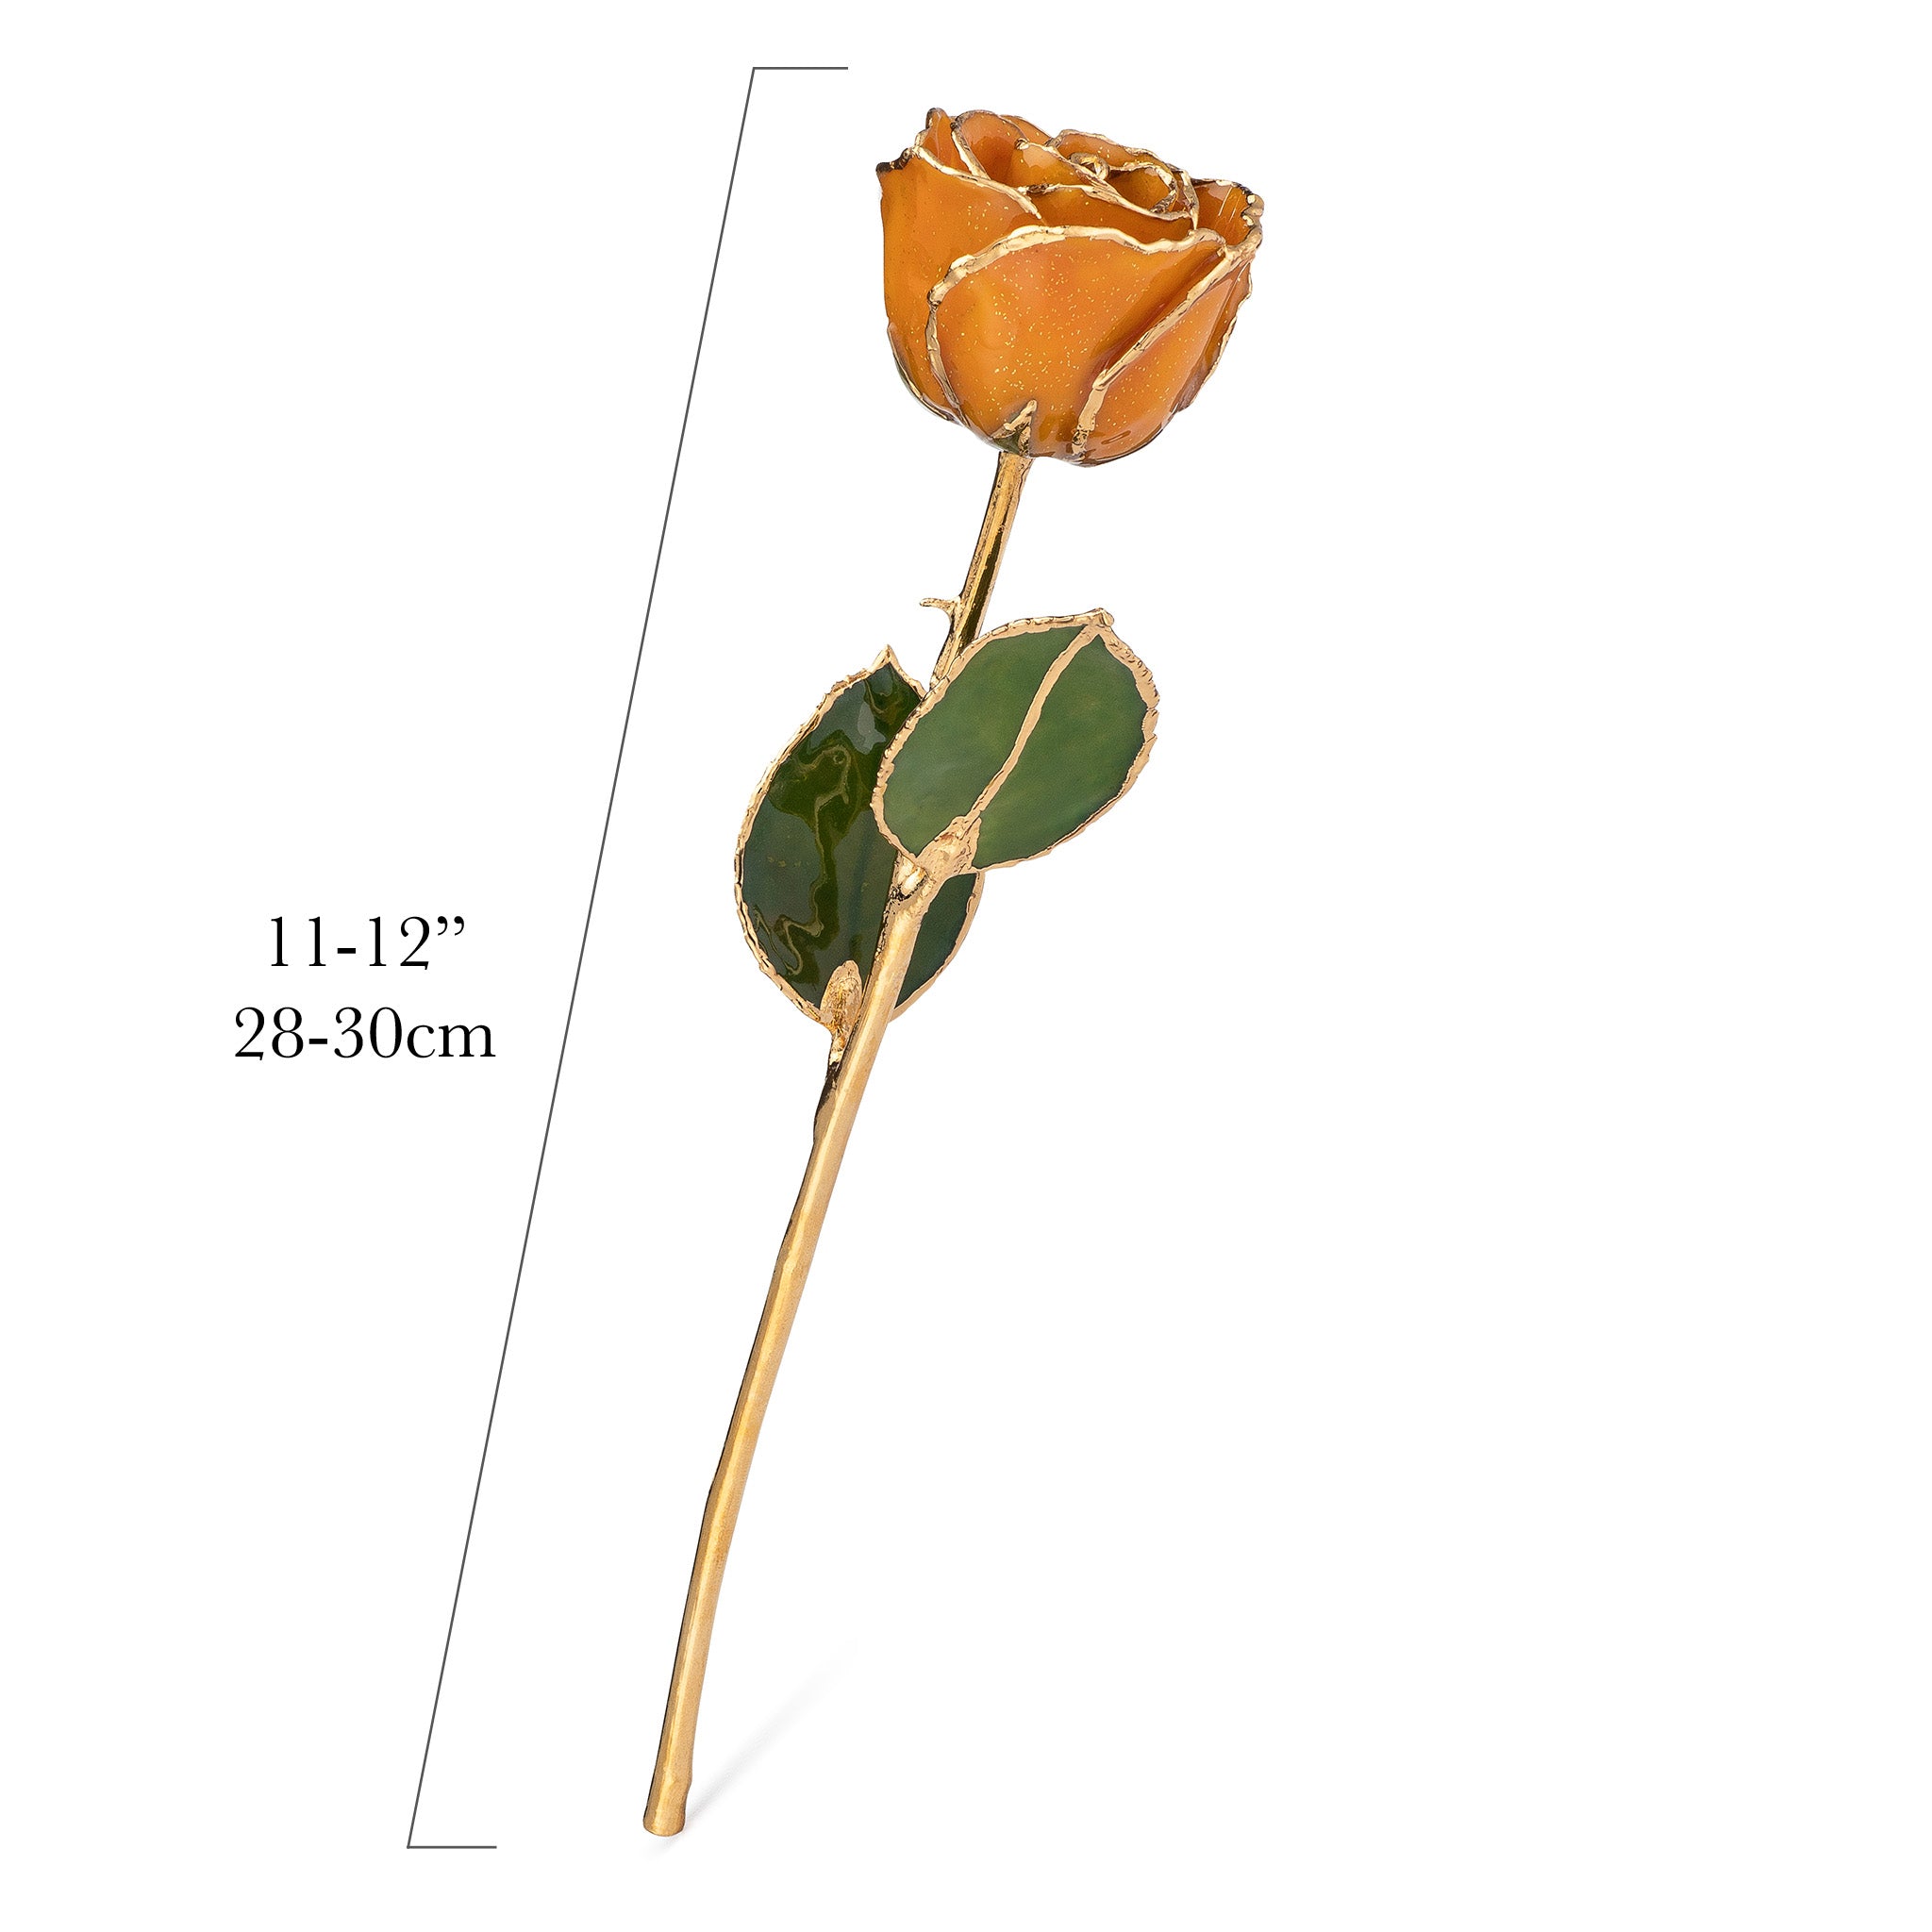 24K Gold Trimmed Forever Rose with Topaz or Citrine (Amber color) Petals with Gold colored Suspended Sparkles. View of Stem, Leaves, and Rose Petals and Showing Detail of Gold Trim with measurements of rose